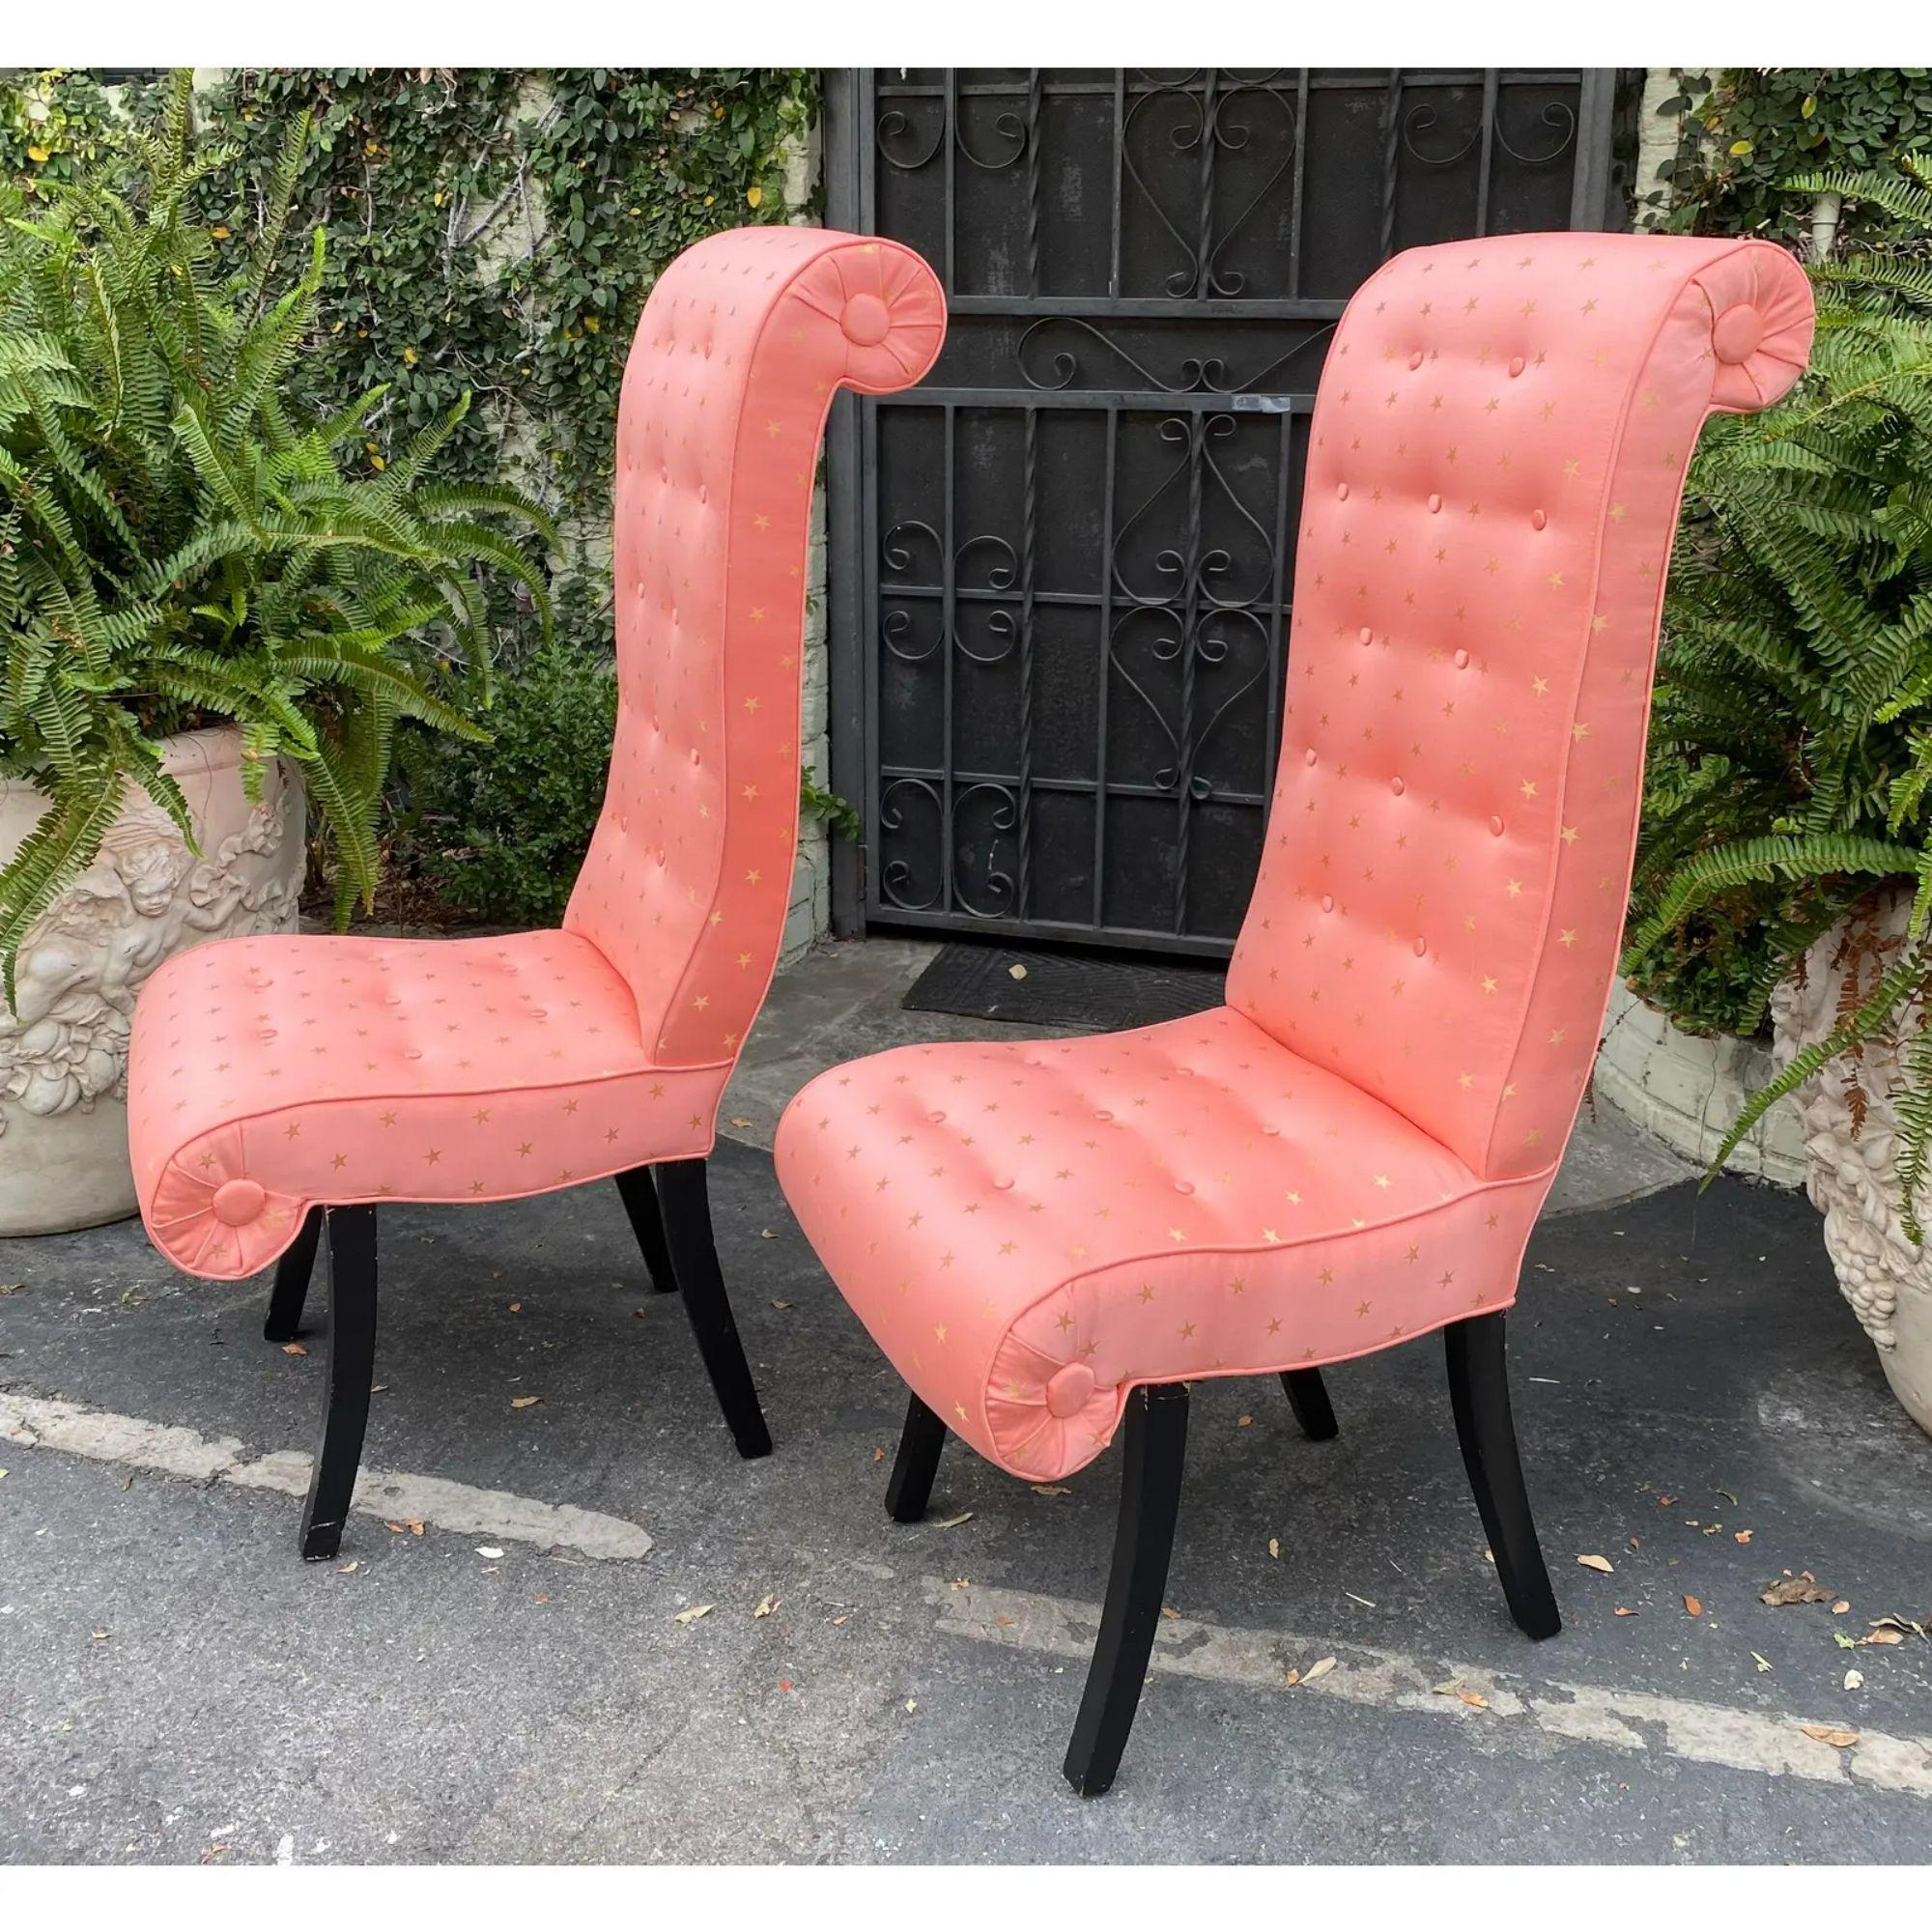 Pair of Mid-Century Hollywood Regency Scroll Back Chairs with Scalamandre Fabric In Good Condition For Sale In LOS ANGELES, CA